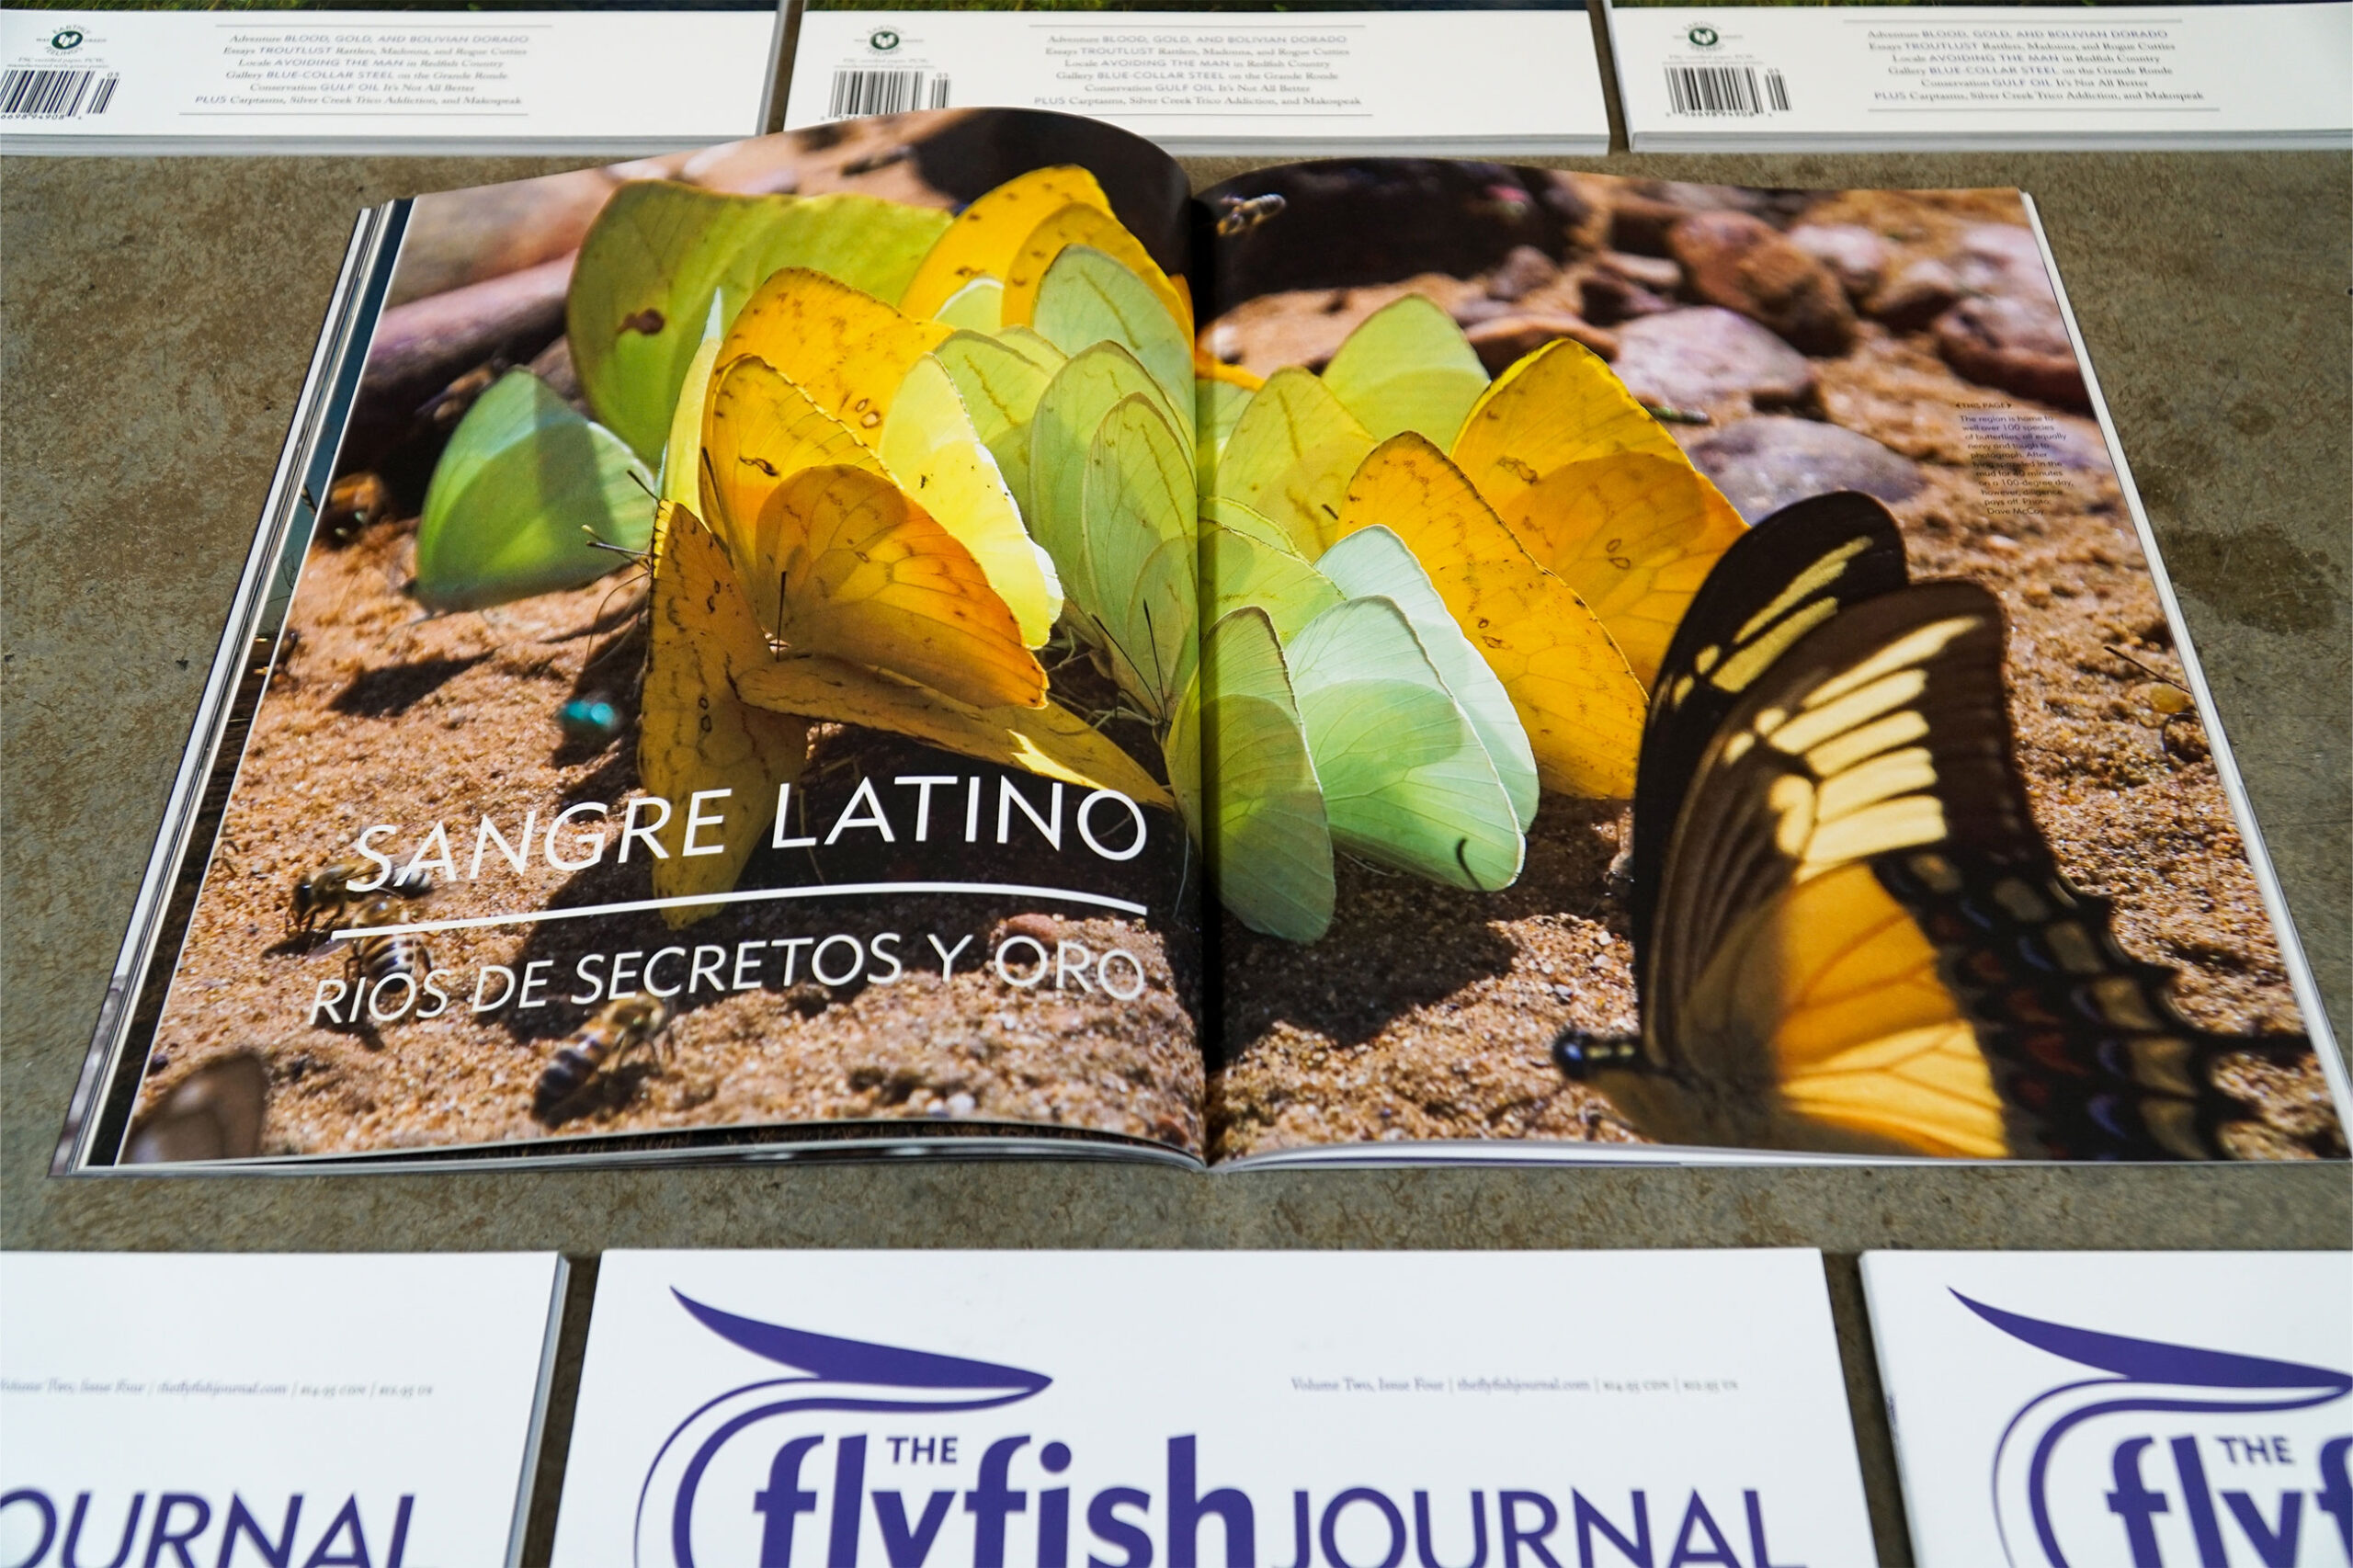 The Flyfish Journal Volume 2 Issue 4 Feature Sangre Latino